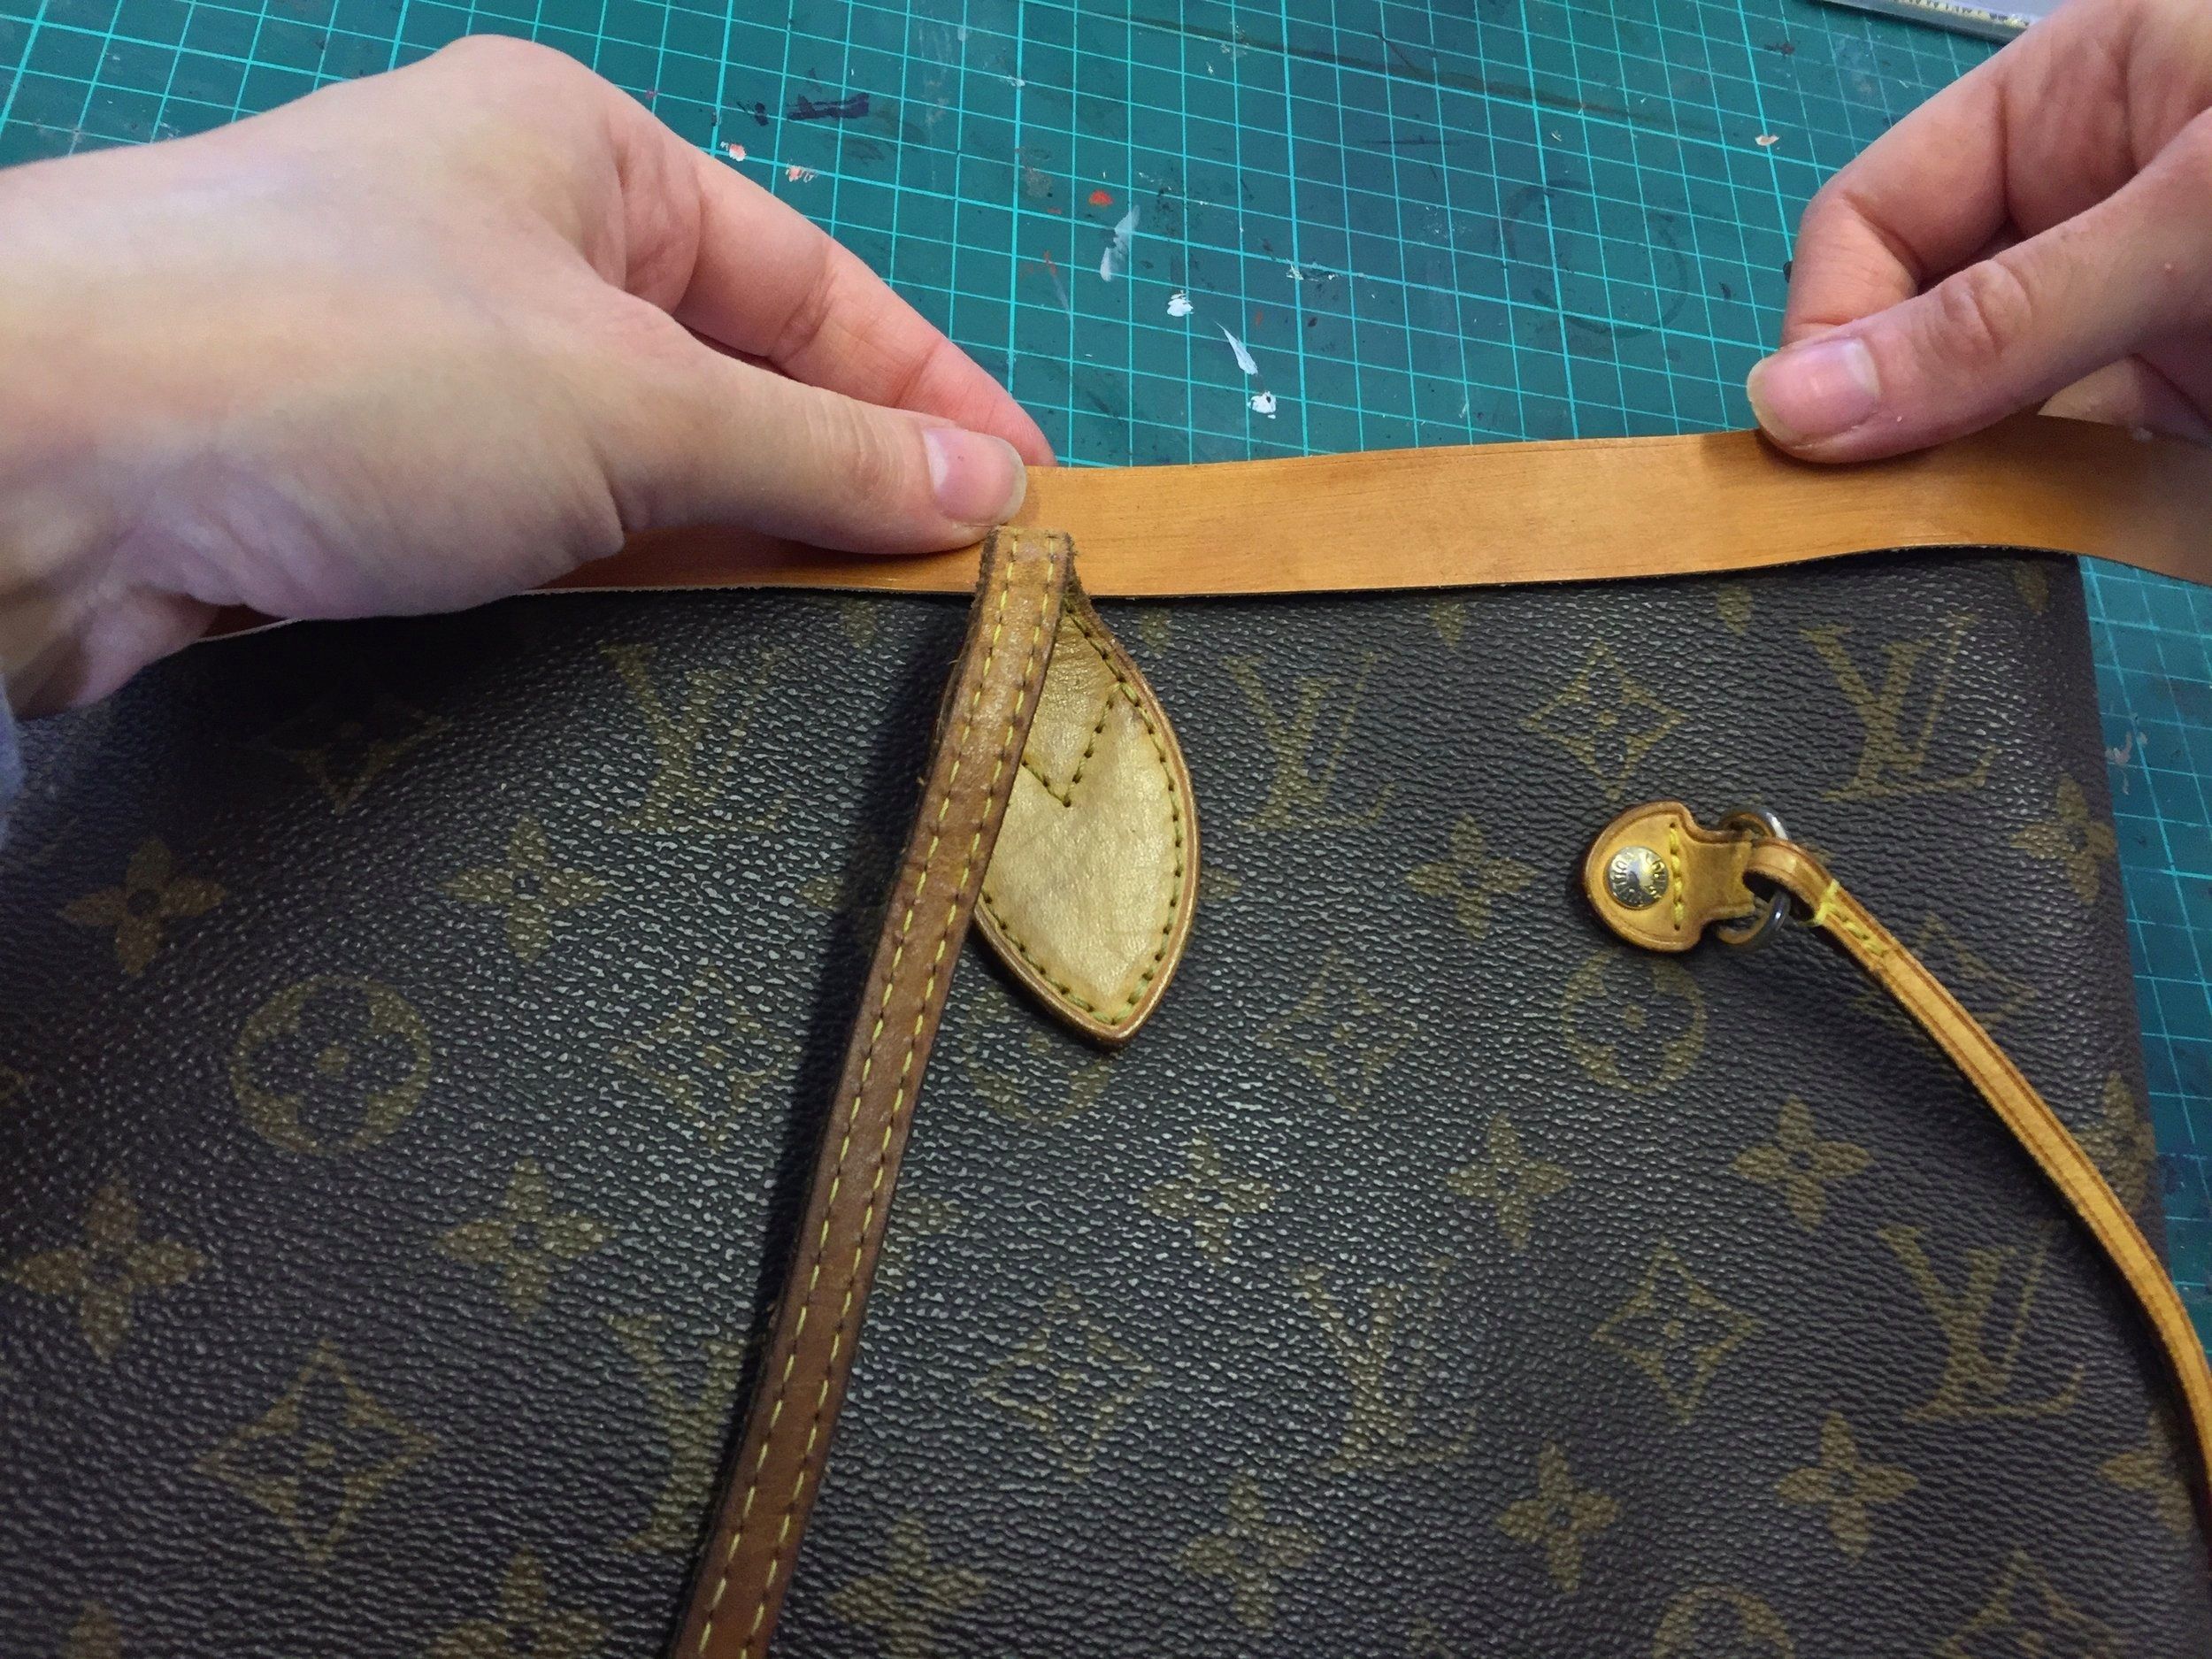 LOUIS VUITTON NEVERFULL REPAIRED 🙌✨ PRICES & WHY? NEW VACHETTA LEATHER